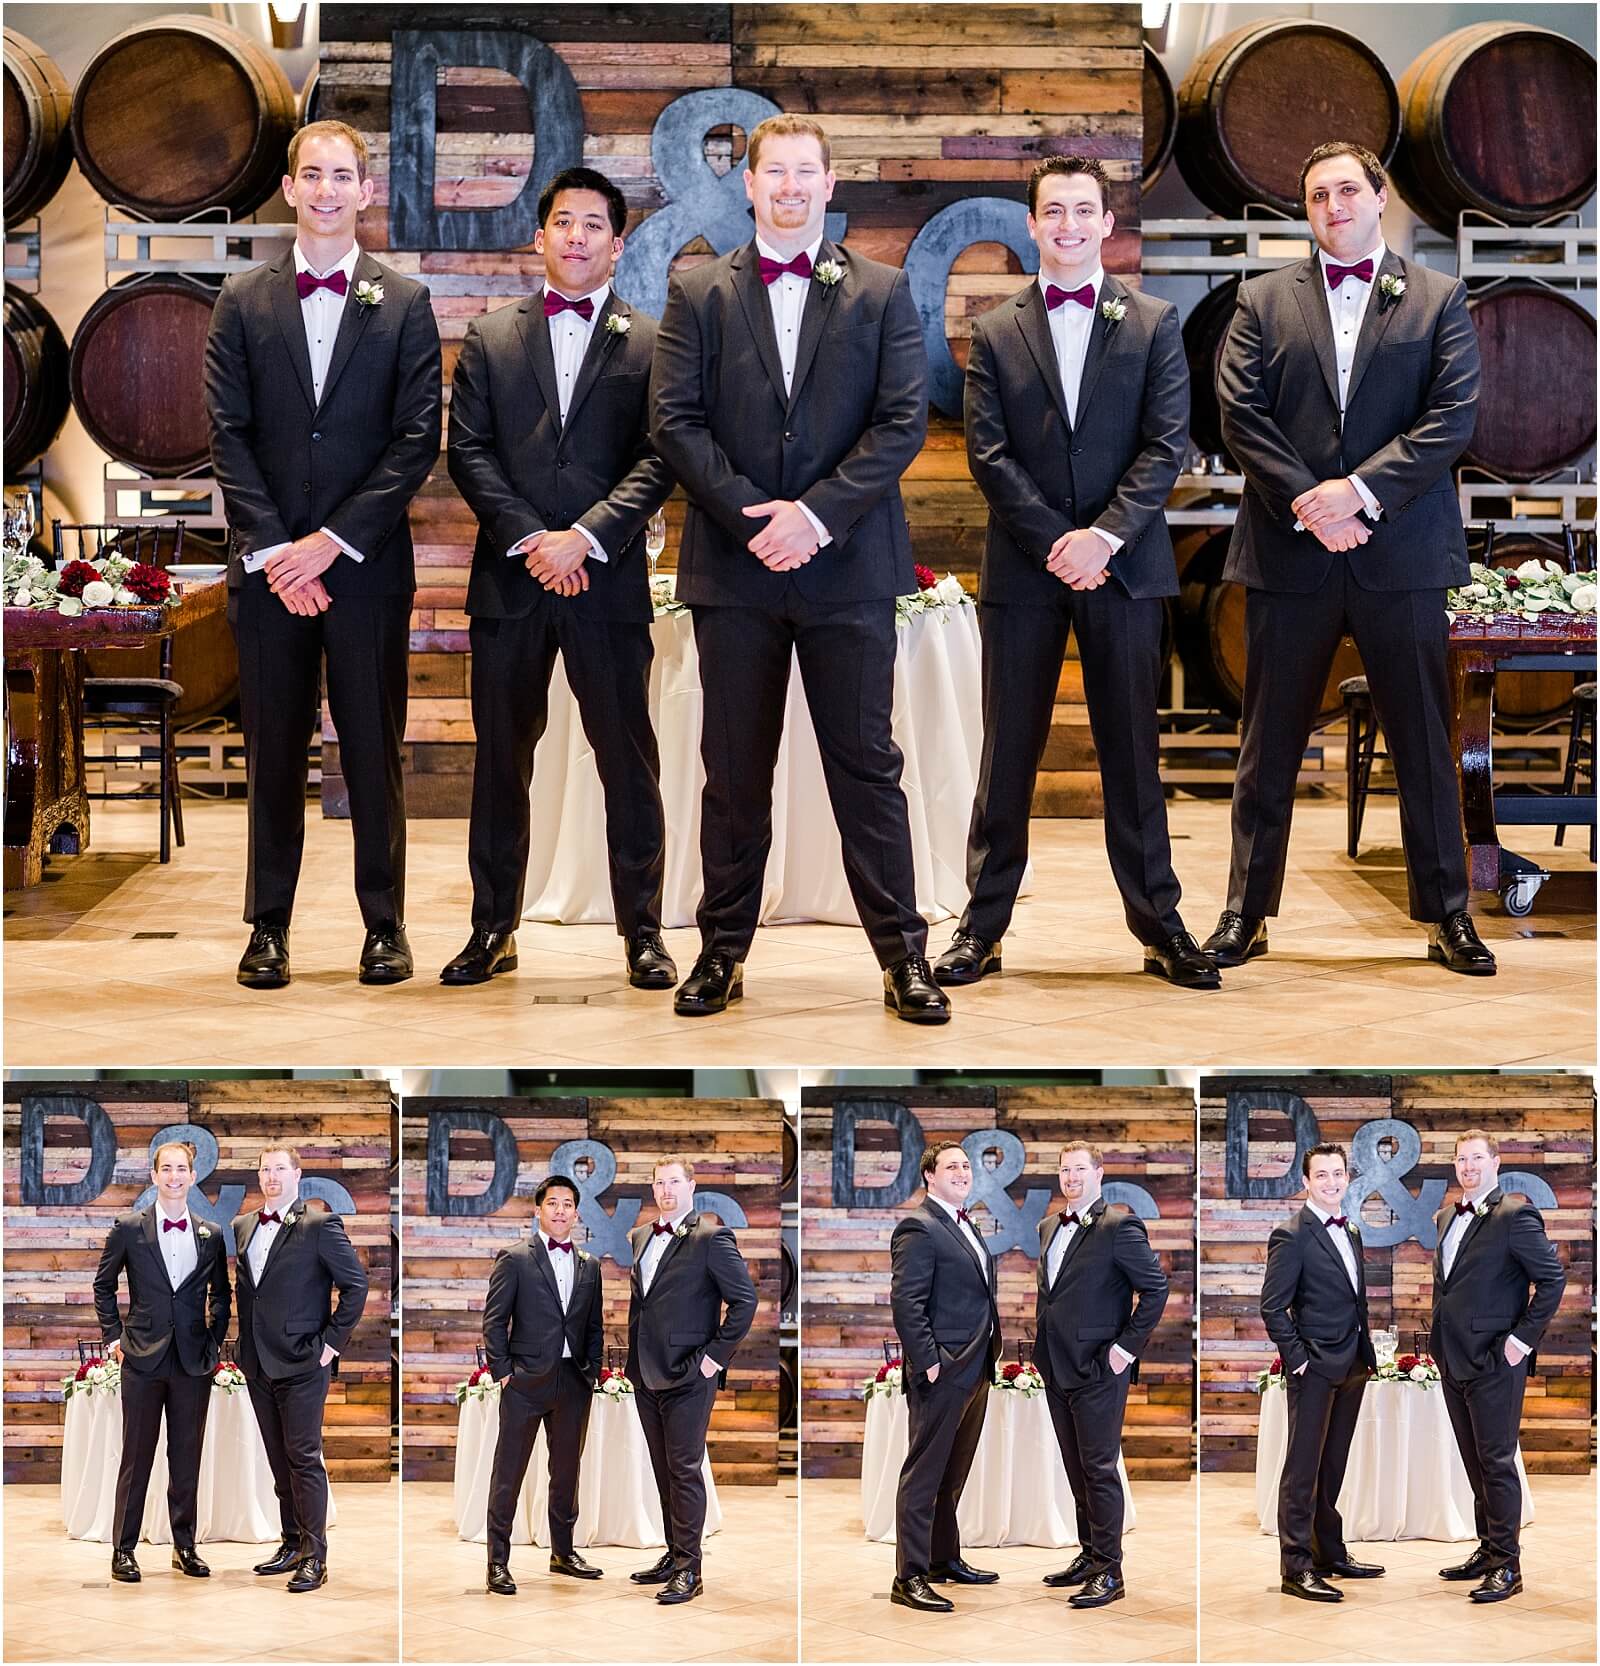 Groom and groomsmen portraits at Palm Event Center in Pleasanton, CA.